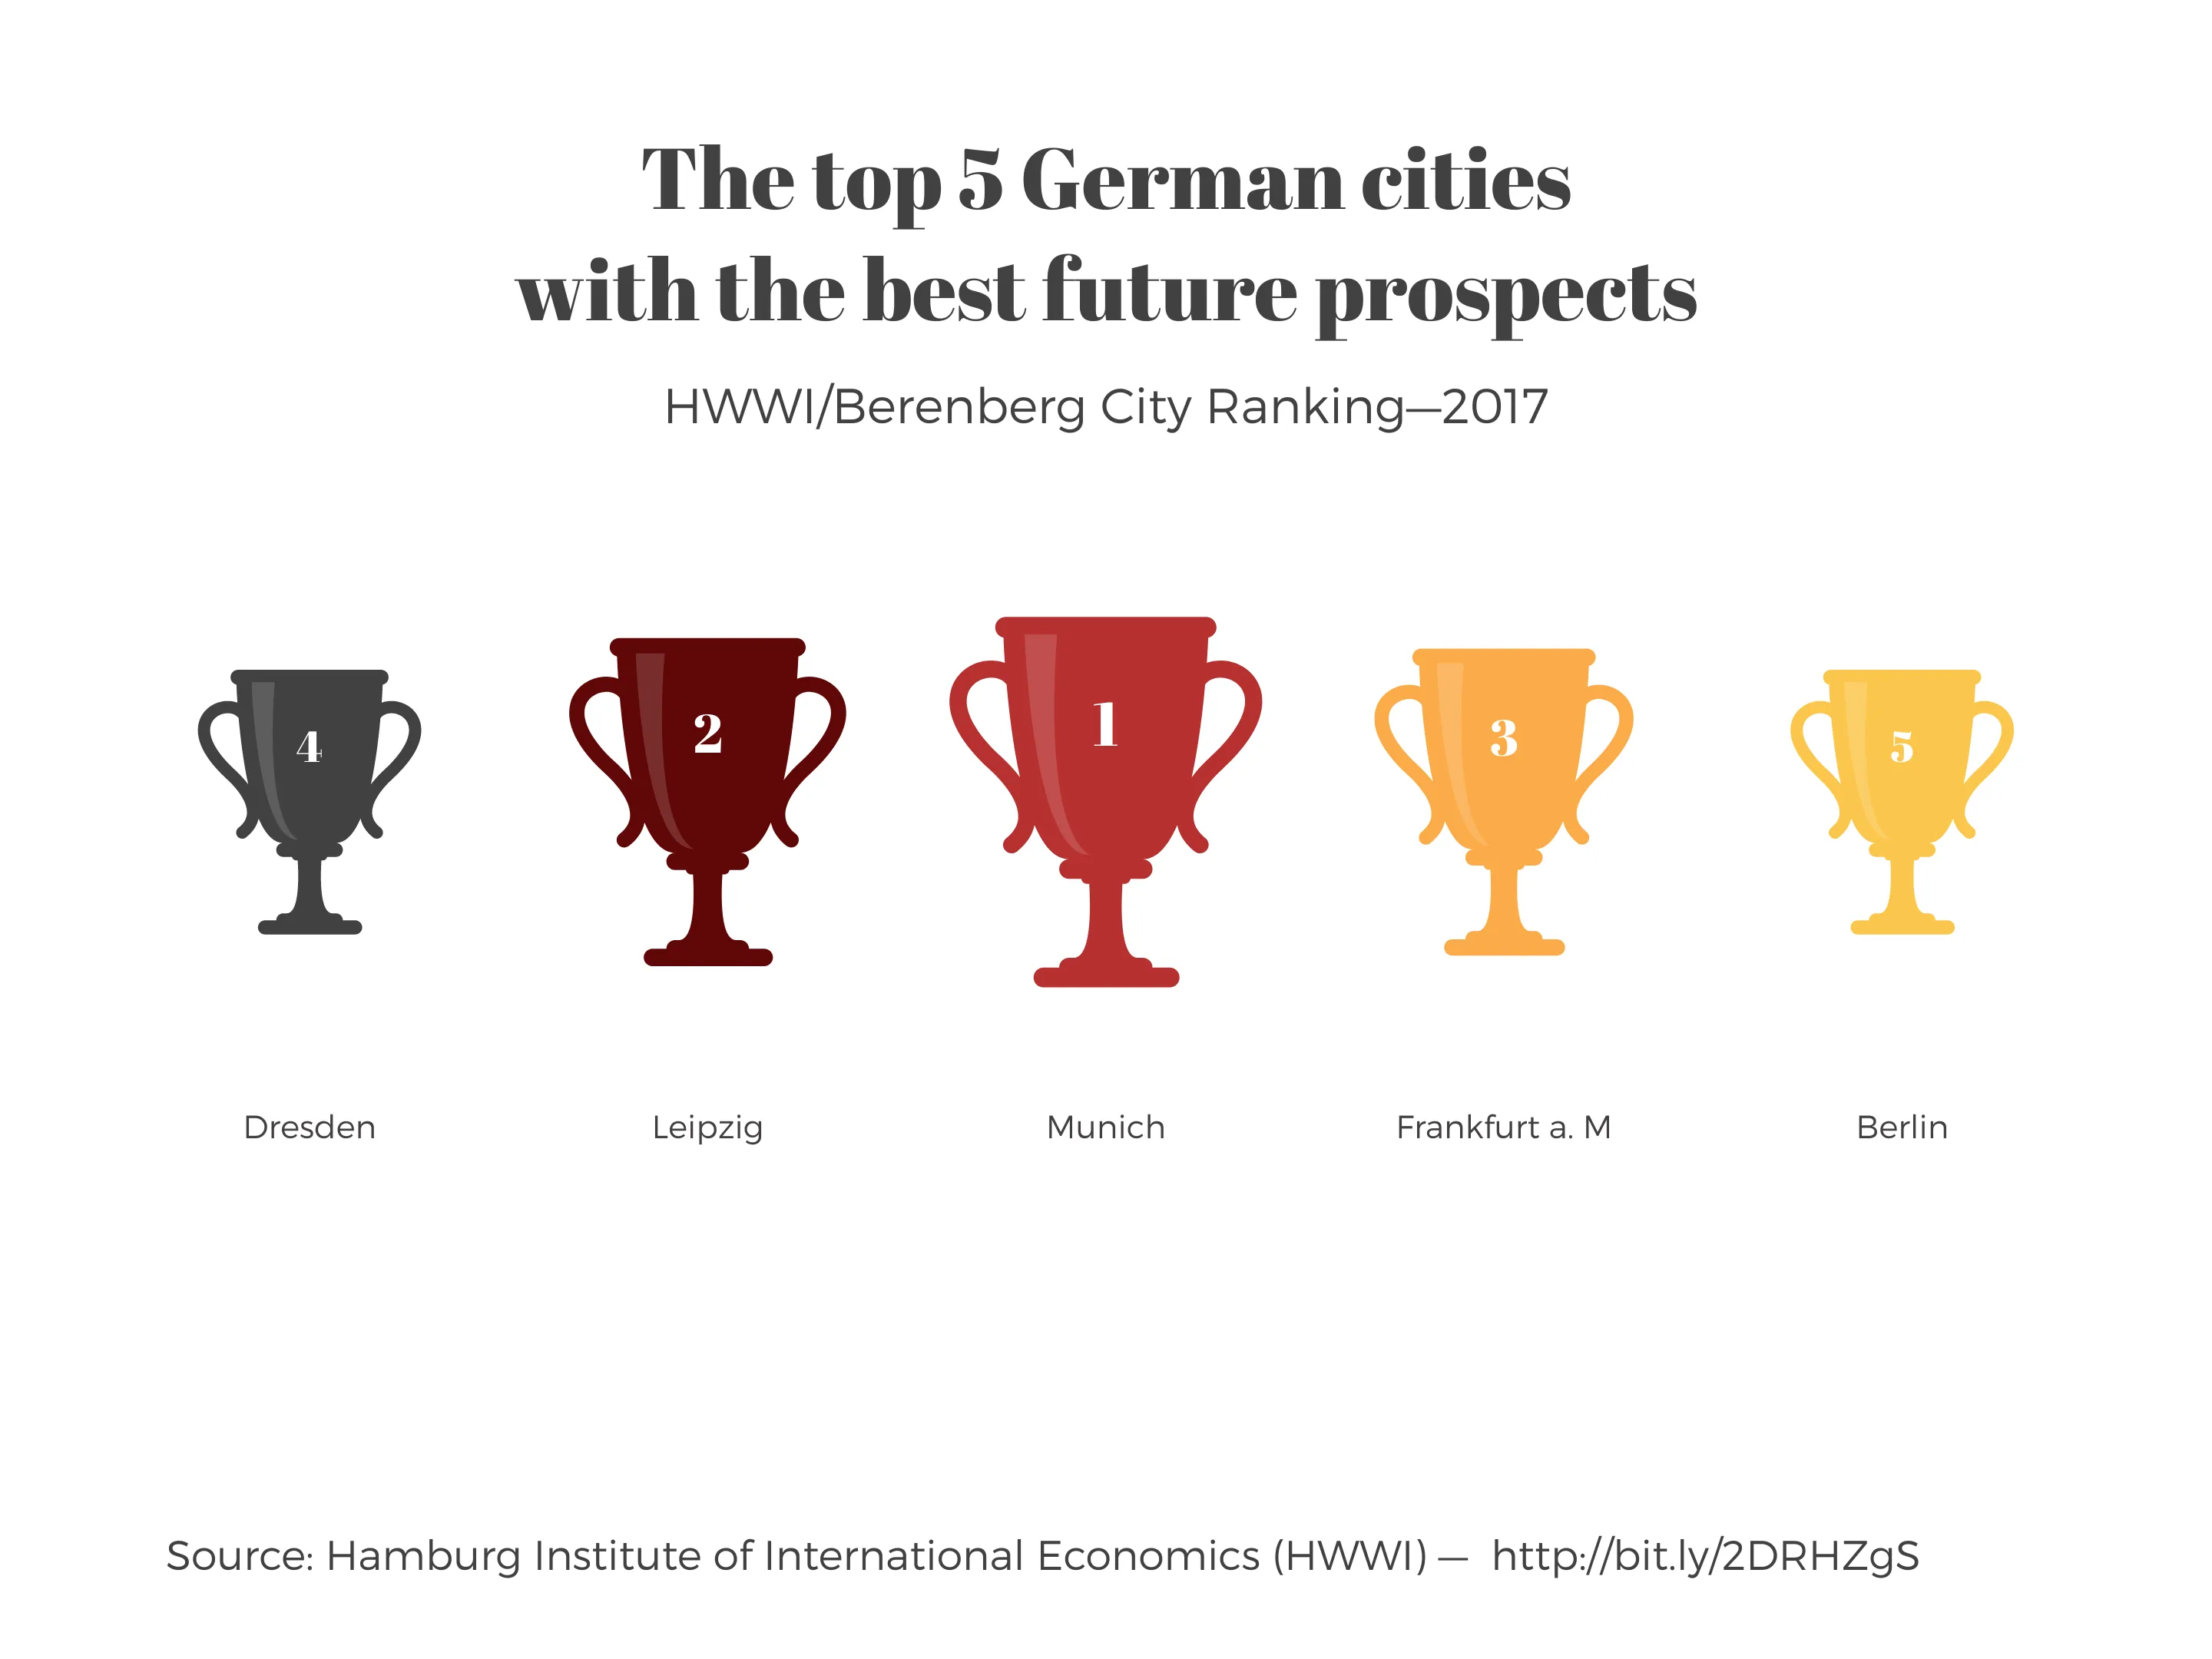 The top 5 German cities with the best future prospects